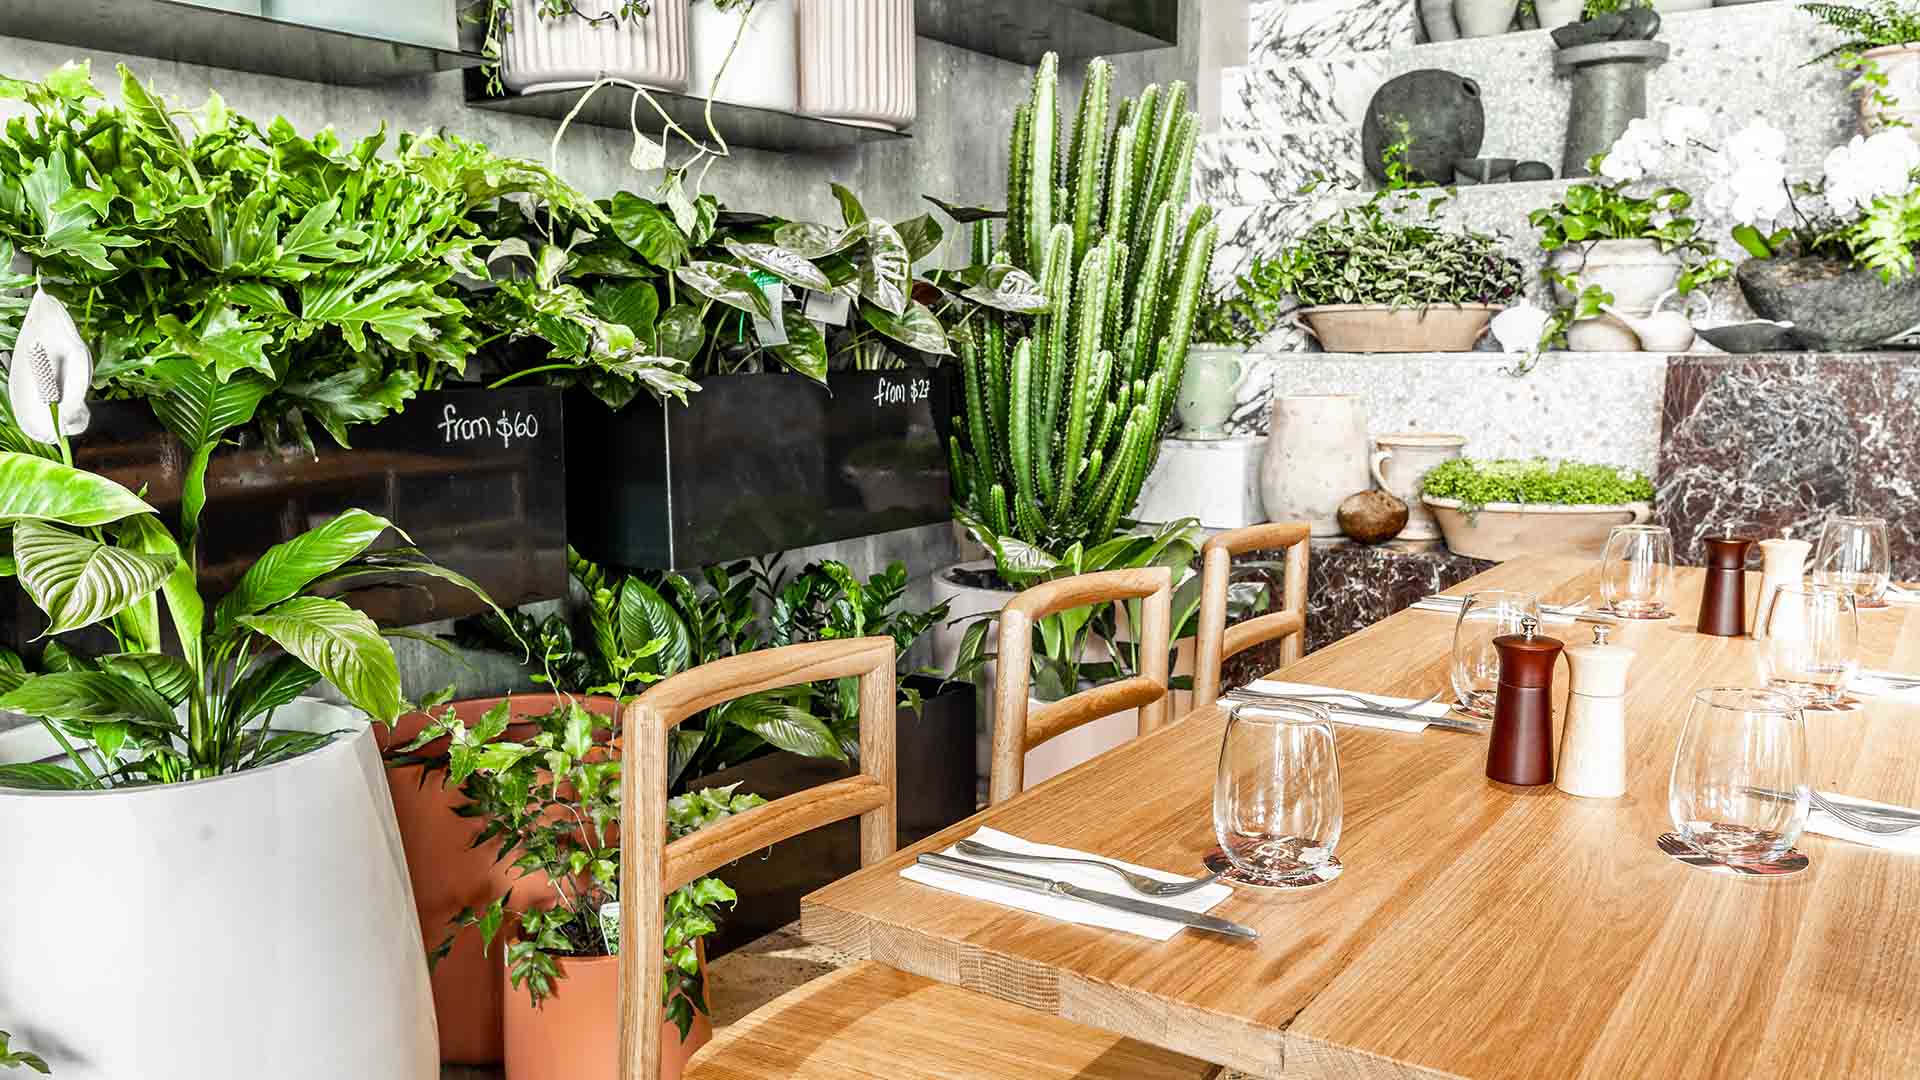 The Green Has Opened a Permanent Plant Shop and Middle Eastern Restaurant on James Street